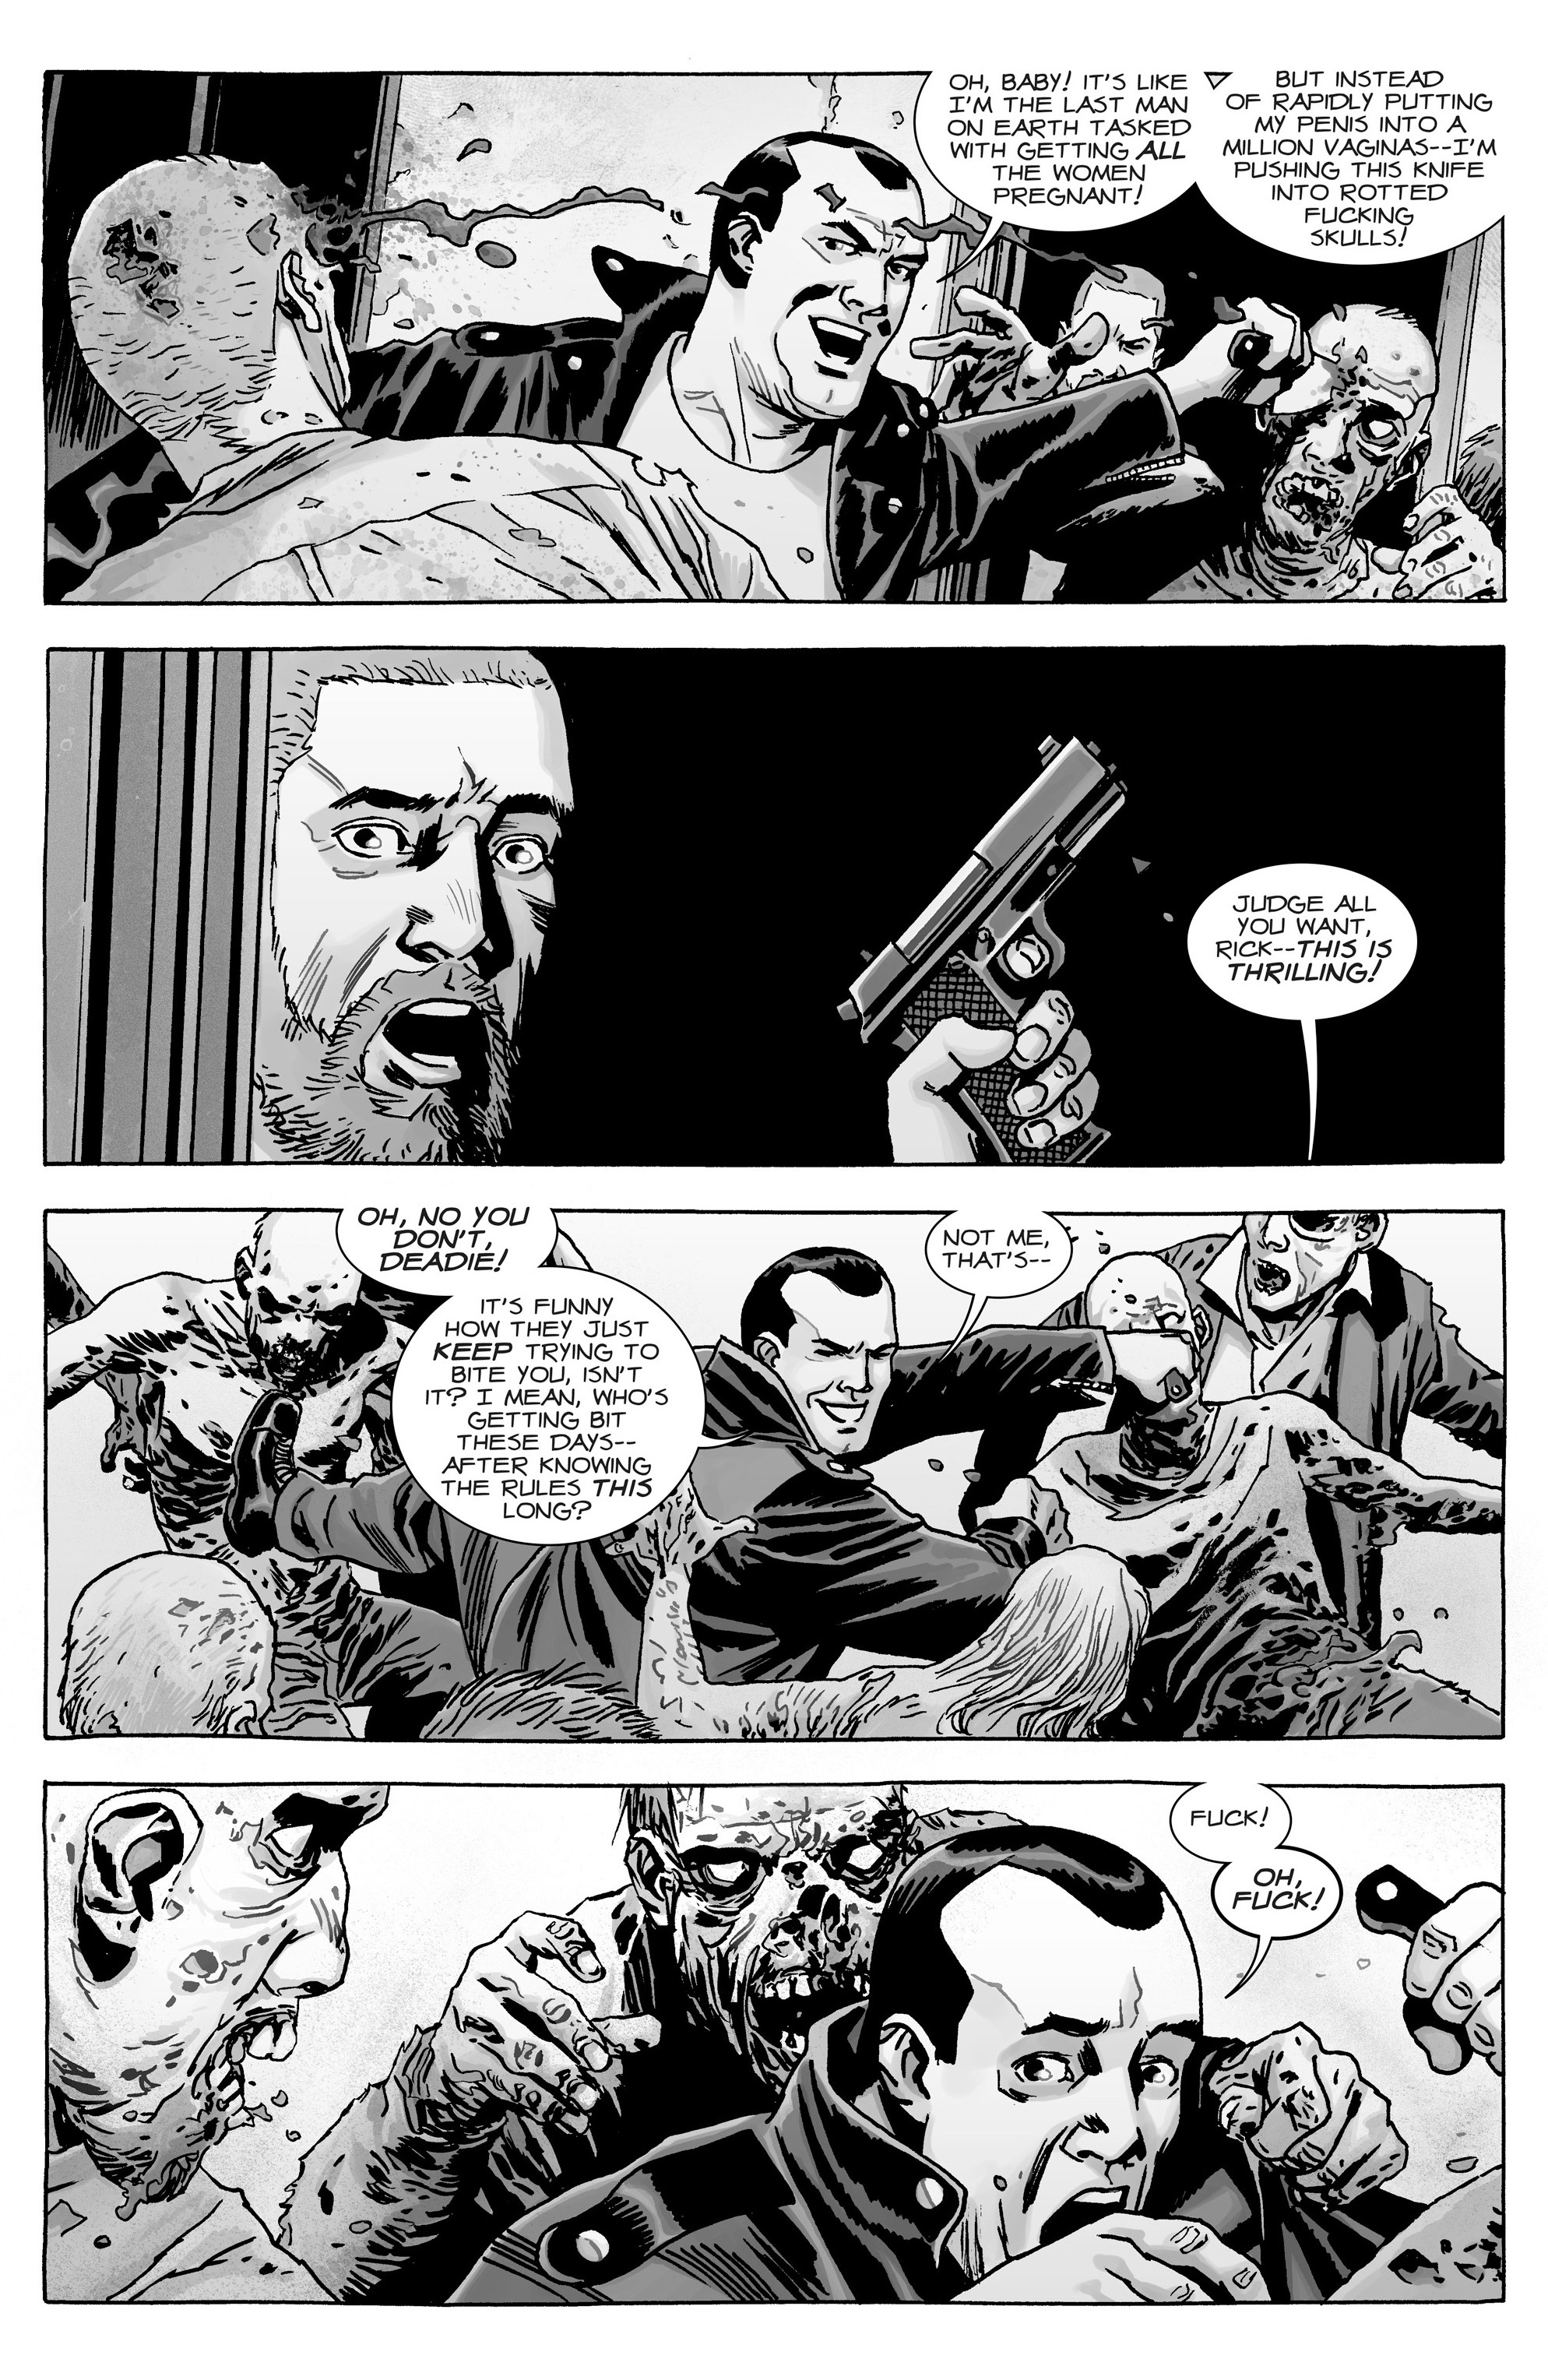 The Walking Dead (2003-): Chapter 165 - Page 3